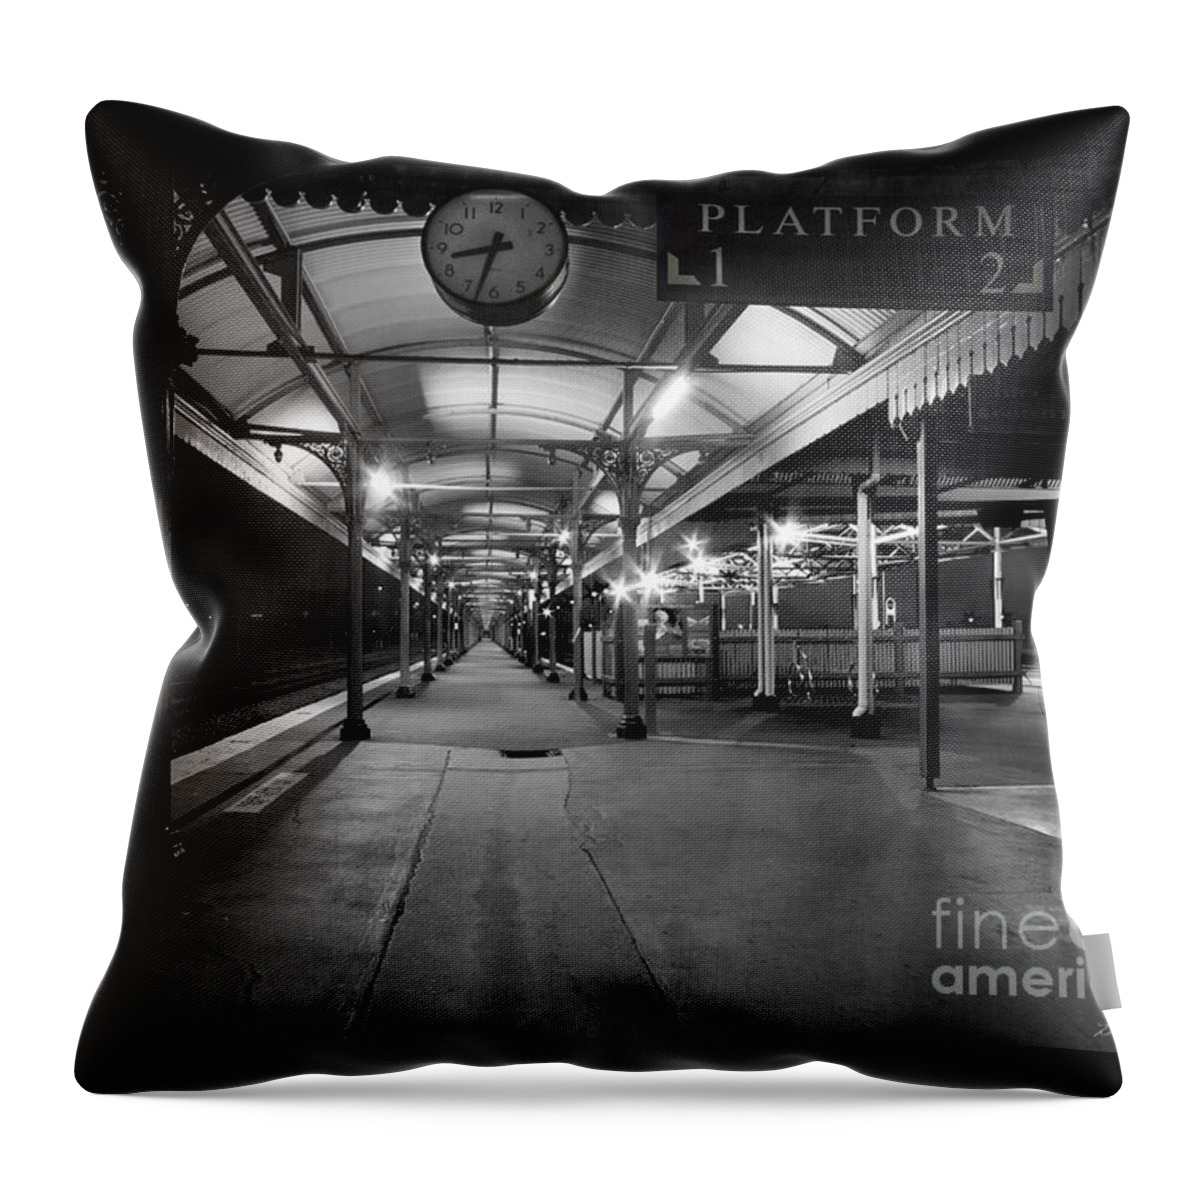 Architecture Throw Pillow featuring the photograph Platform 1 by Linda Lees